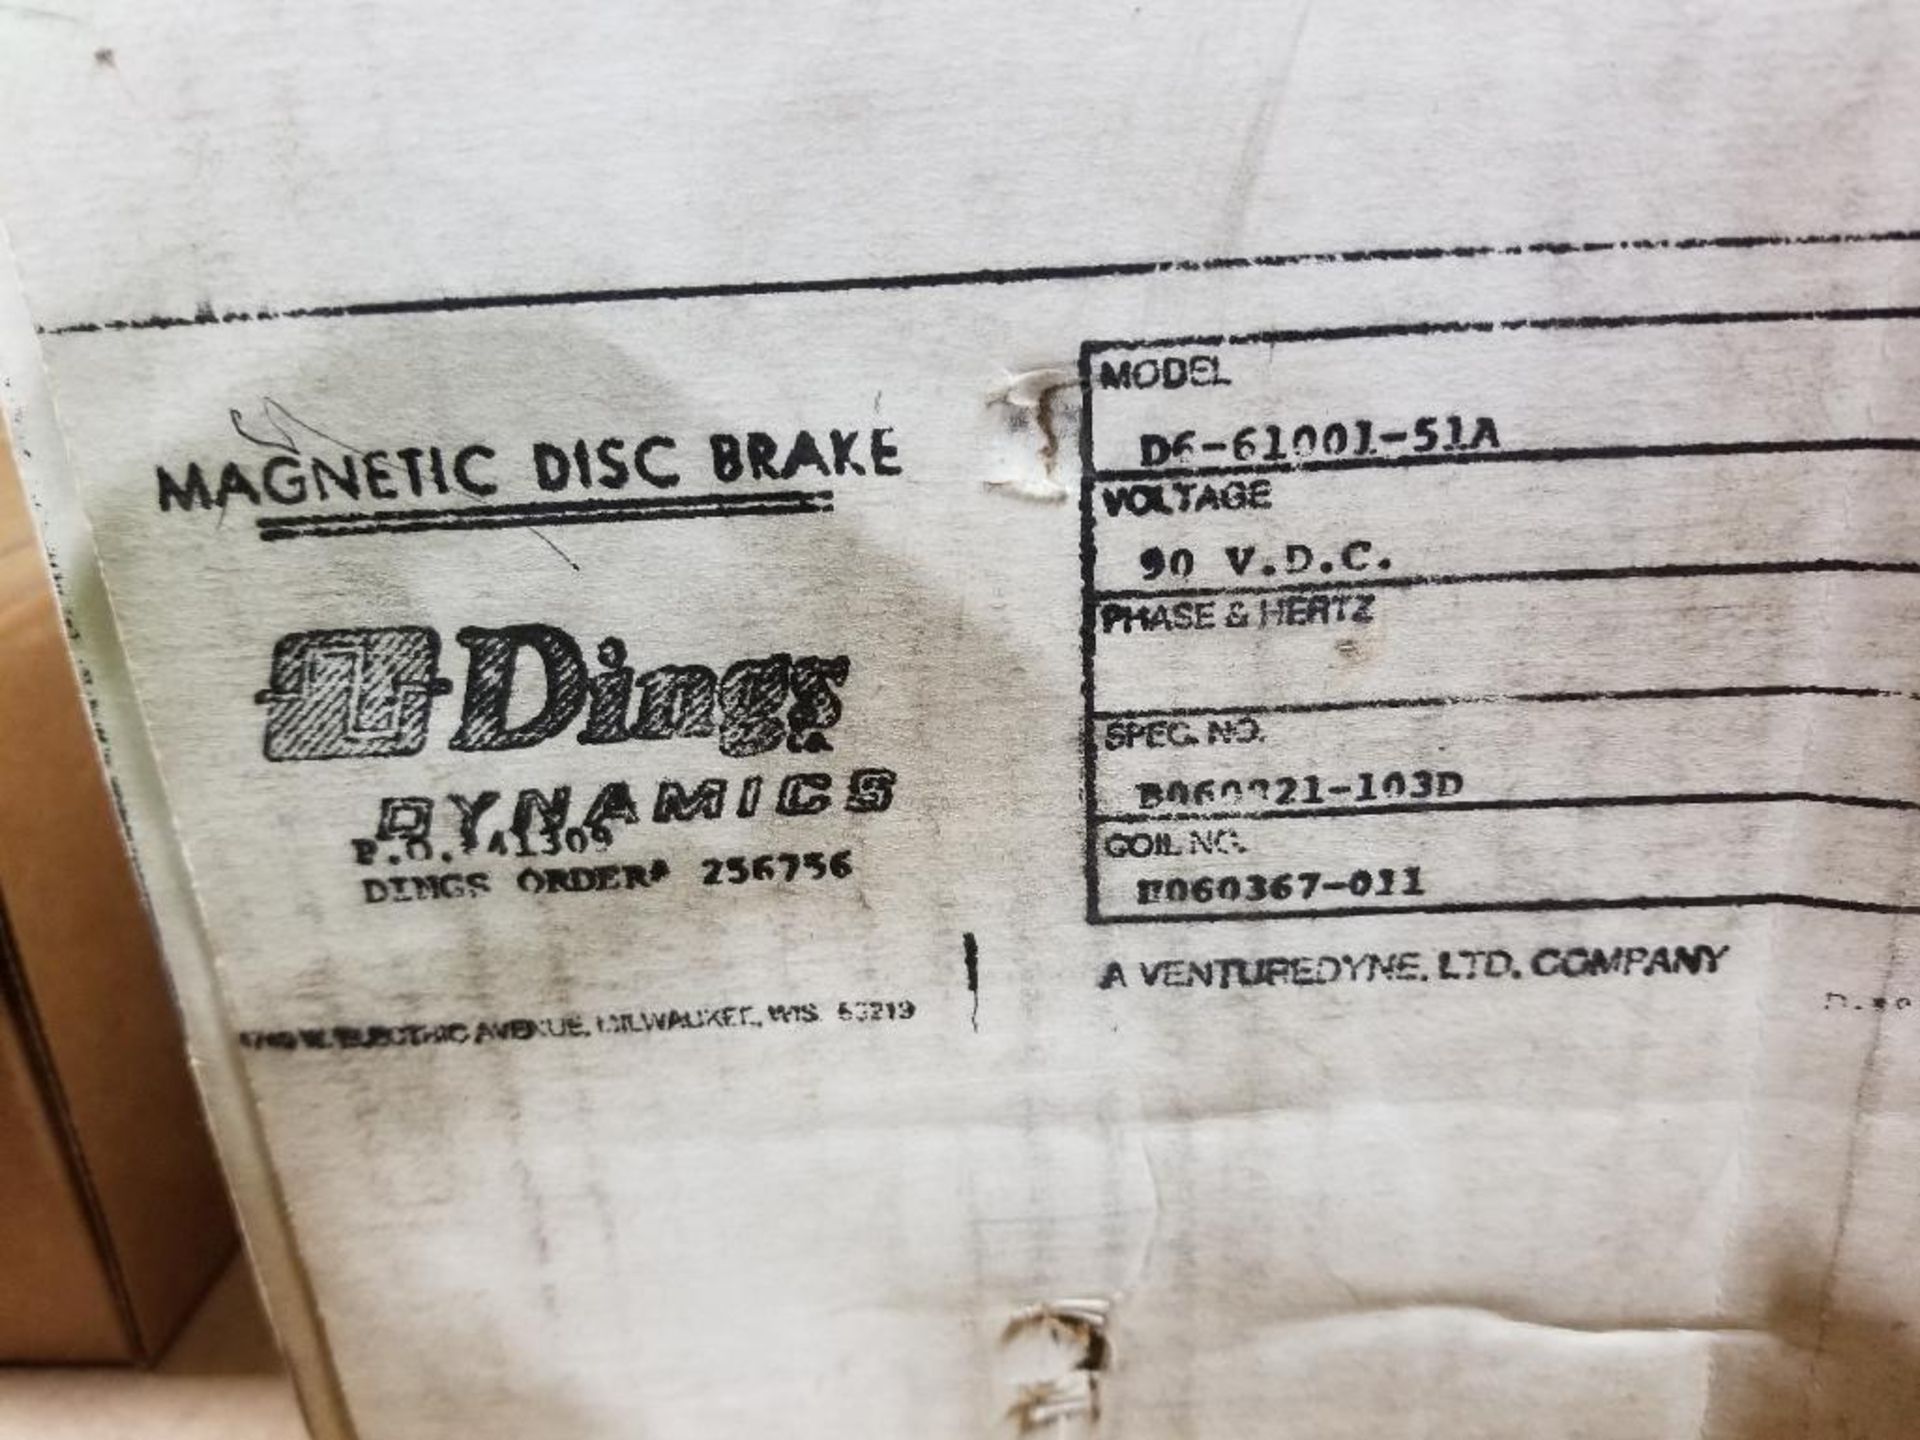 Dings Dynamics magnetic disc brake. Model D6-61001-51A. New in box. - Image 2 of 2